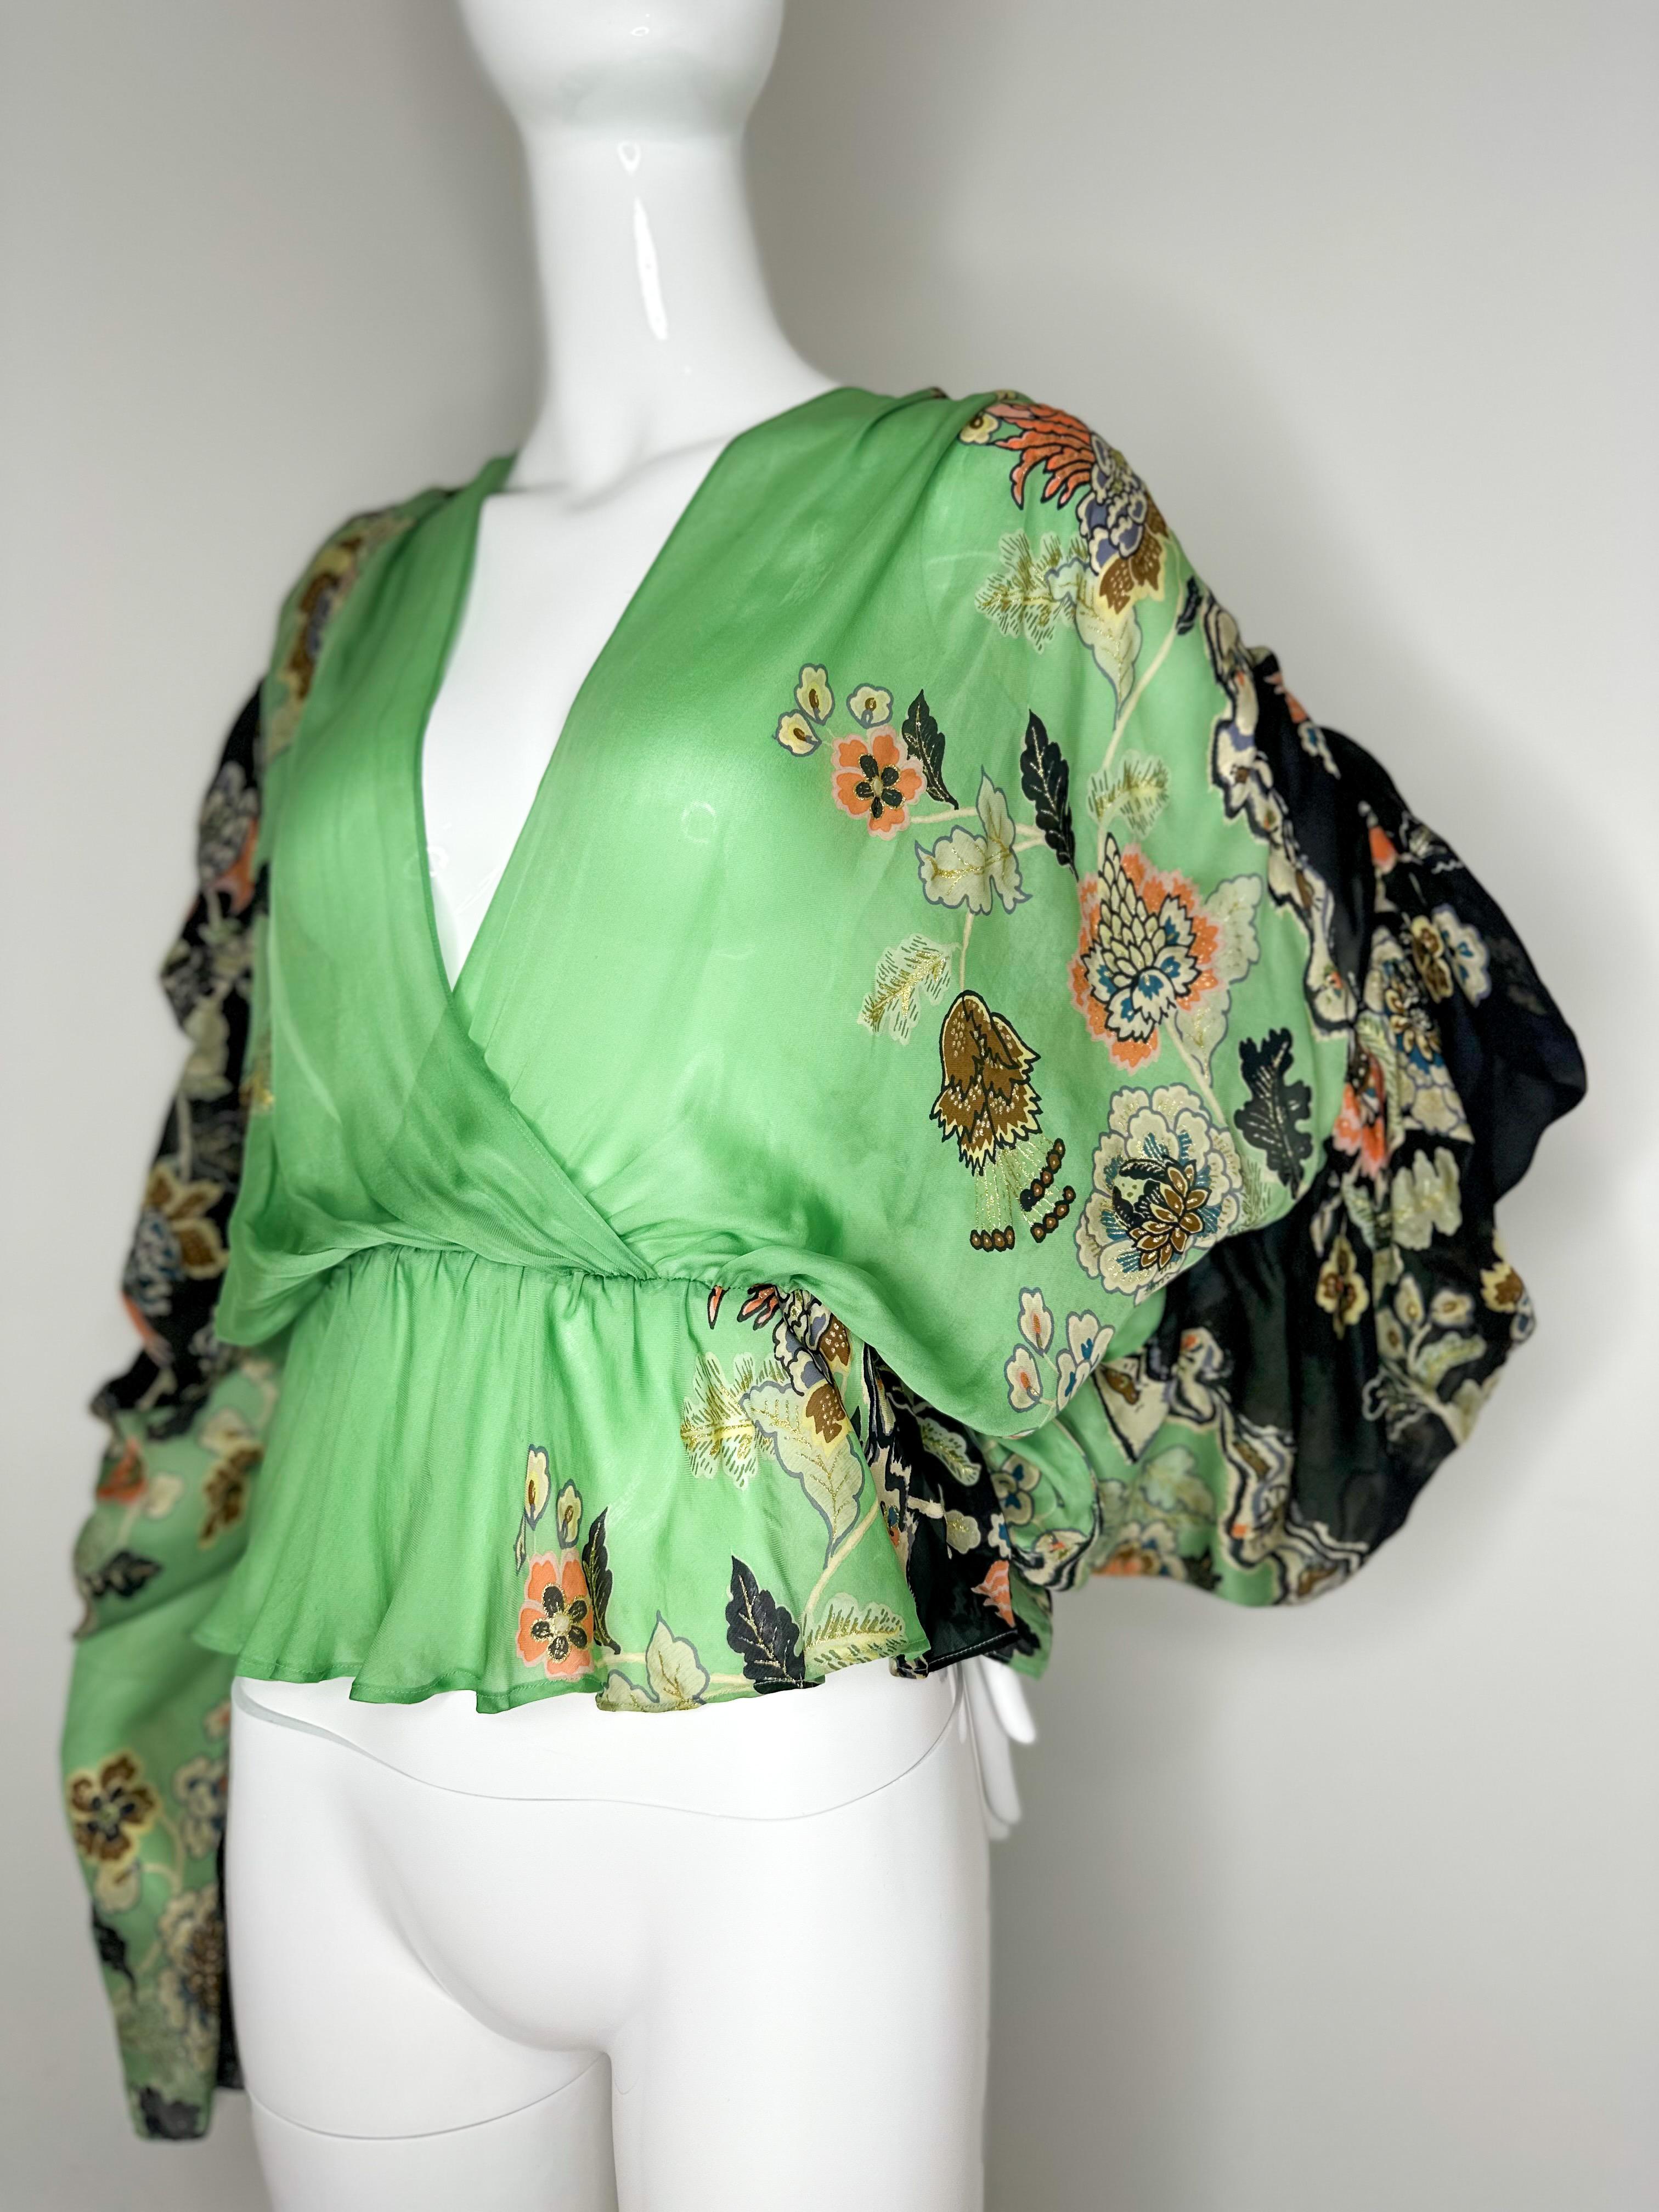 Roberto Cavalli 2003 chinoiserie silk ruffle top 
Size M 

As seen on the runway 

Good vintage condition, no rips or stains 